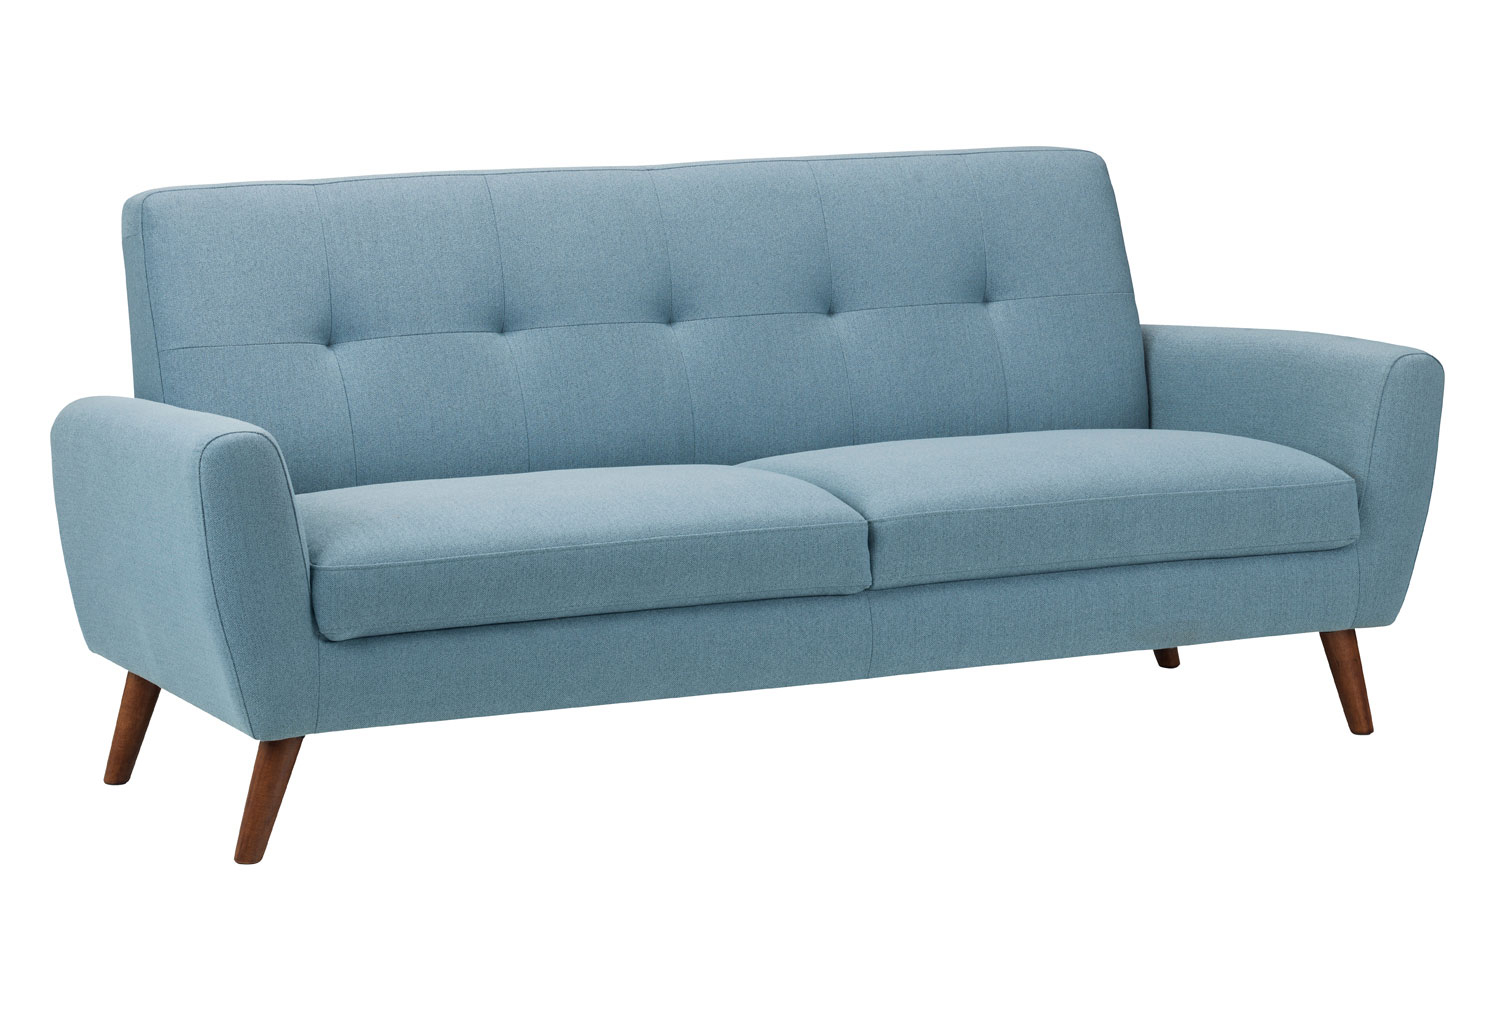 Connelly 3 Seater Sofa (Blue Linen)